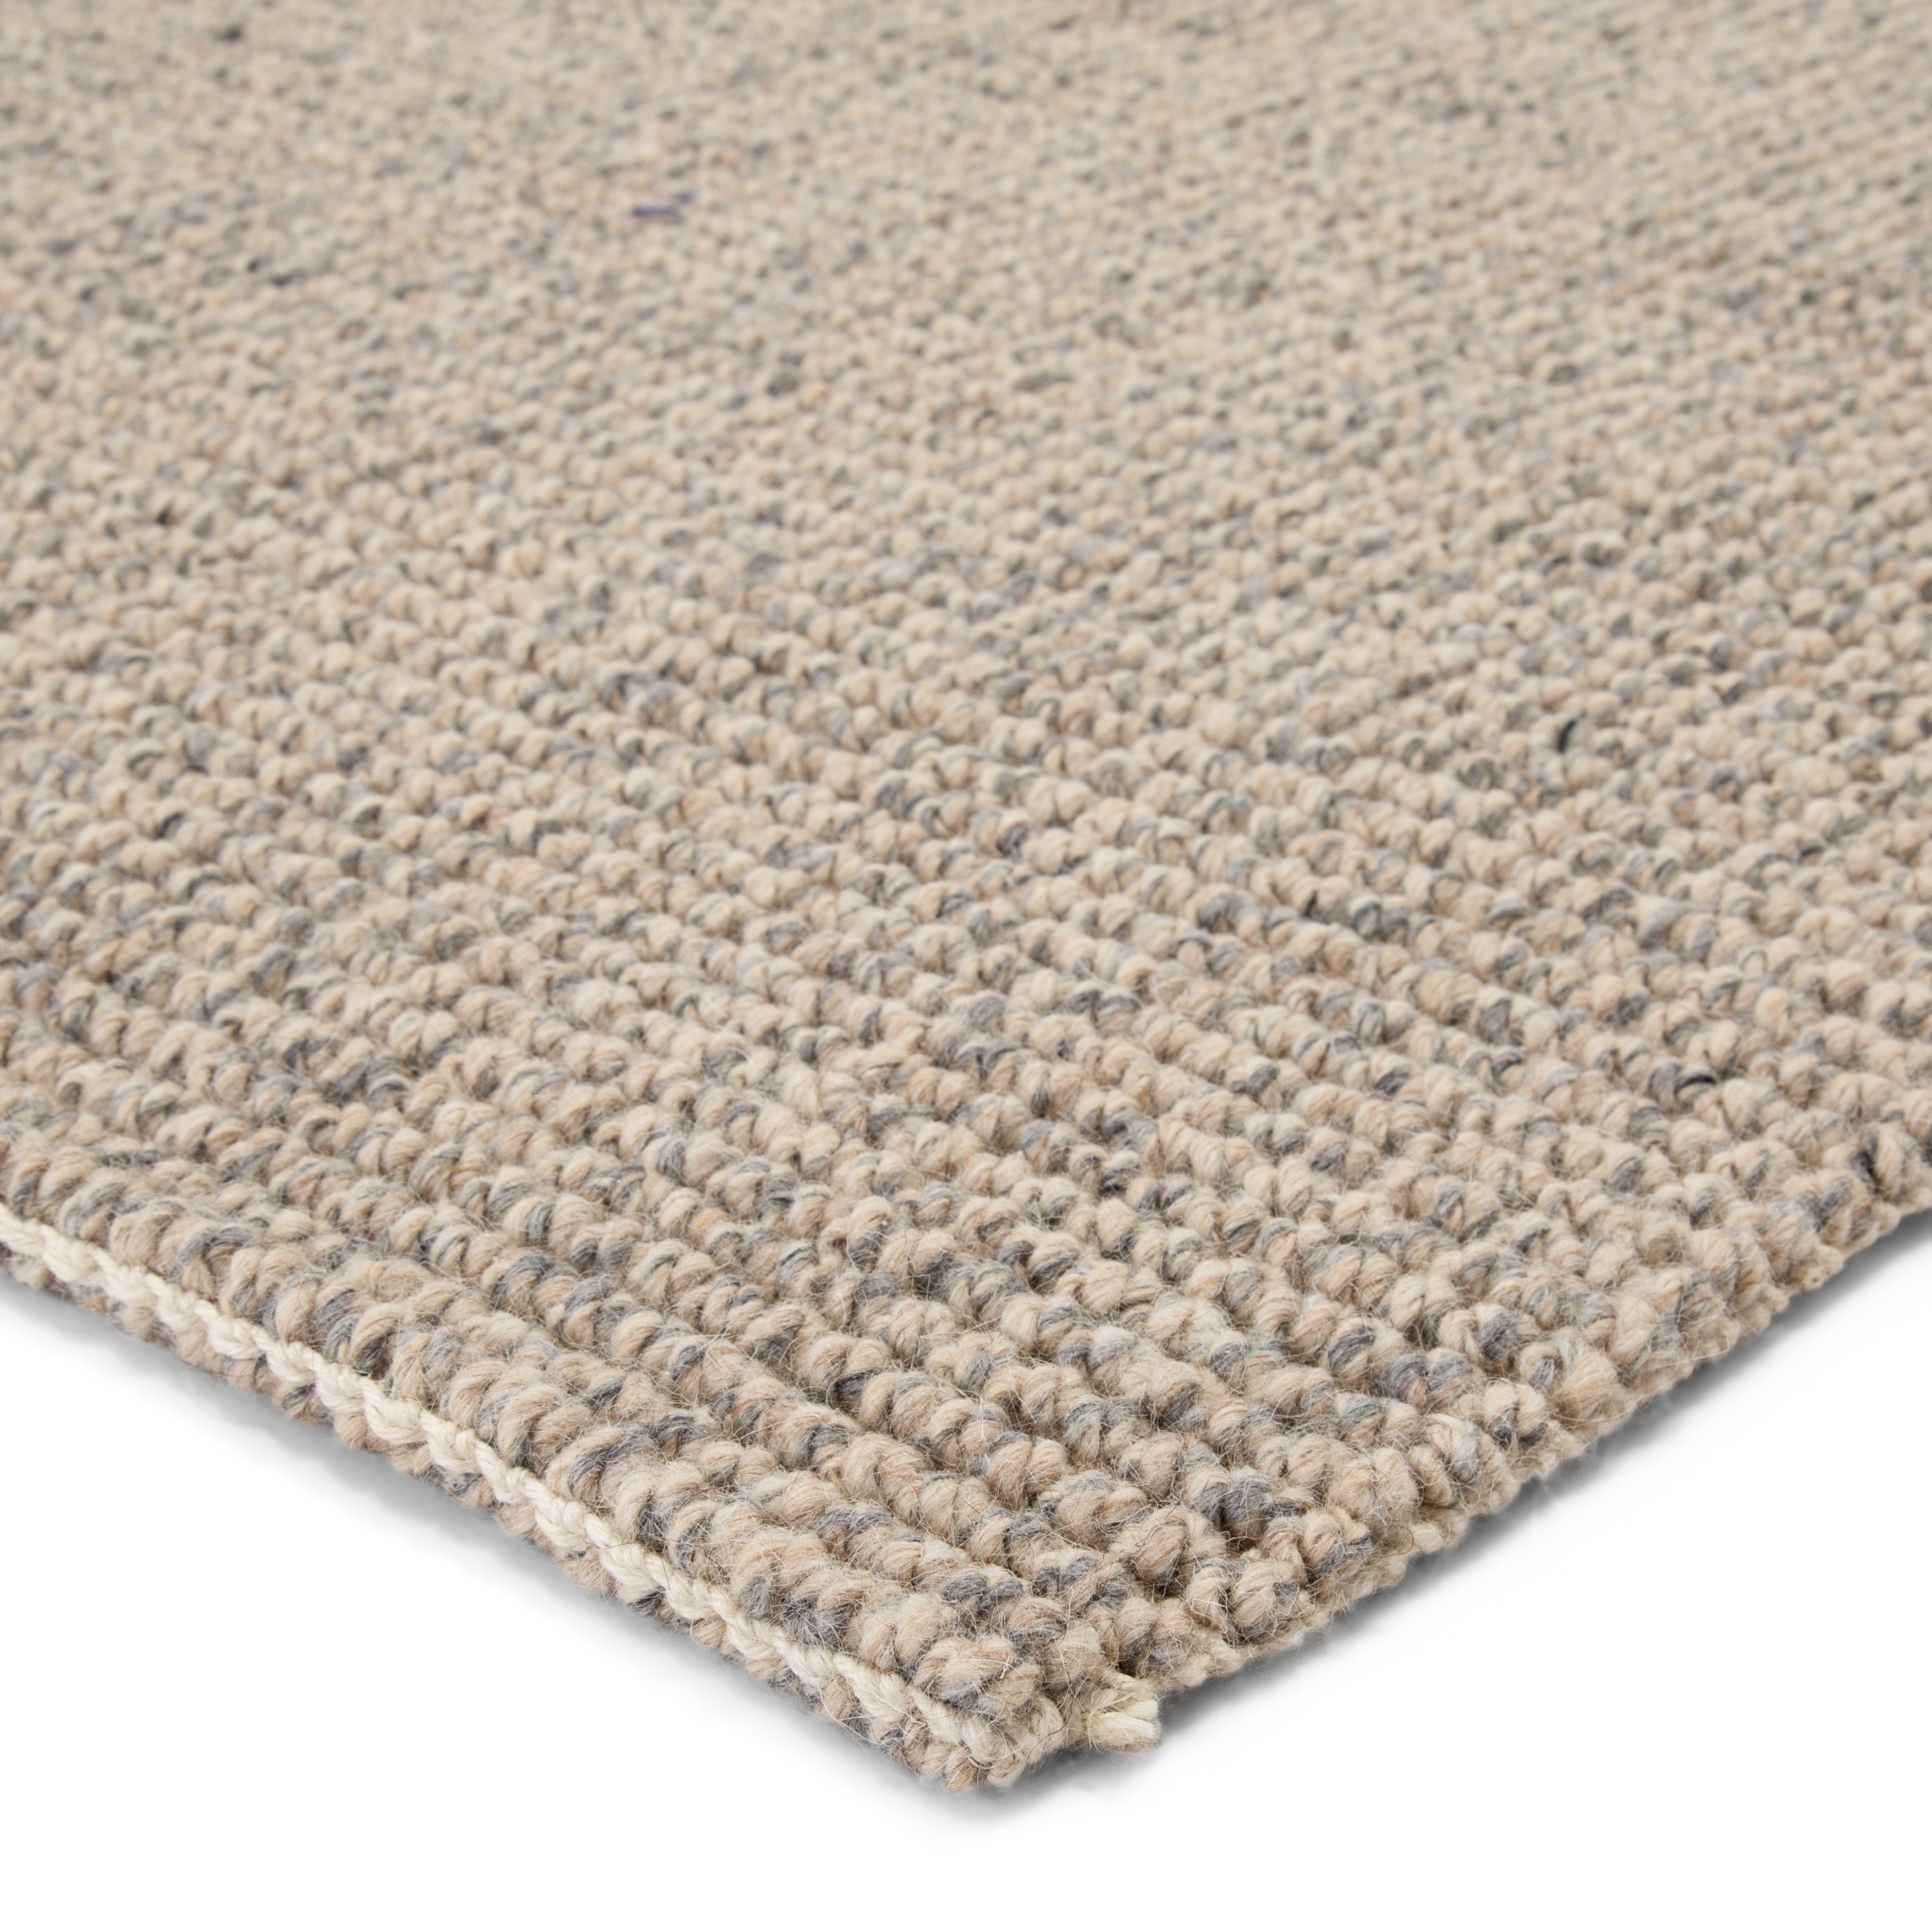 Chael Natural Solid Gray/ Beige Area Rug (9'X12') - Image 1